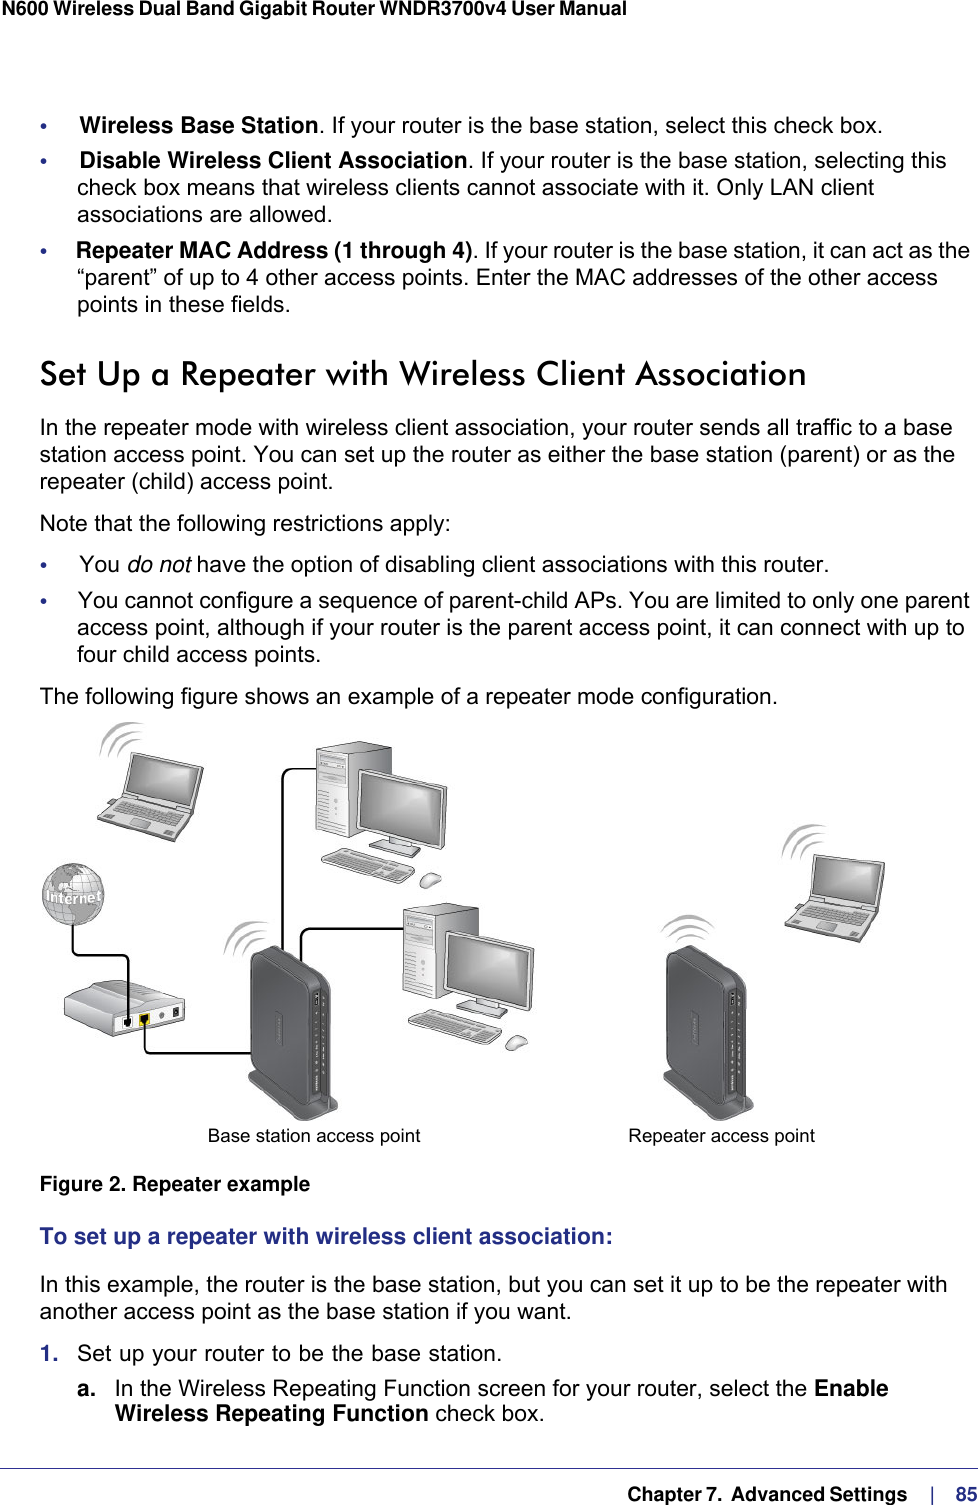   Chapter 7.  Advanced Settings     |    85N600 Wireless Dual Band Gigabit Router WNDR3700v4 User Manual •     Wireless Base Station. If your router is the base station, select this check box.•     Disable Wireless Client Association. If your router is the base station, selecting this check box means that wireless clients cannot associate with it. Only LAN client associations are allowed.•     Repeater MAC Address (1 through 4). If your router is the base station, it can act as the “parent” of up to 4 other access points. Enter the MAC addresses of the other access points in these fields.Set Up a Repeater with Wireless Client AssociationIn the repeater mode with wireless client association, your router sends all traffic to a base station access point. You can set up the router as either the base station (parent) or as the repeater (child) access point. Note that the following restrictions apply:•     You do not have the option of disabling client associations with this router. •     You cannot configure a sequence of parent-child APs. You are limited to only one parent access point, although if your router is the parent access point, it can connect with up to four child access points. The following figure shows an example of a repeater mode configuration.Repeater access pointBase station access point Figure 2. Repeater exampleTo set up a repeater with wireless client association:In this example, the router is the base station, but you can set it up to be the repeater with another access point as the base station if you want.1.  Set up your router to be the base station.a. In the Wireless Repeating Function screen for your router, select the Enable Wireless Repeating Function check box.